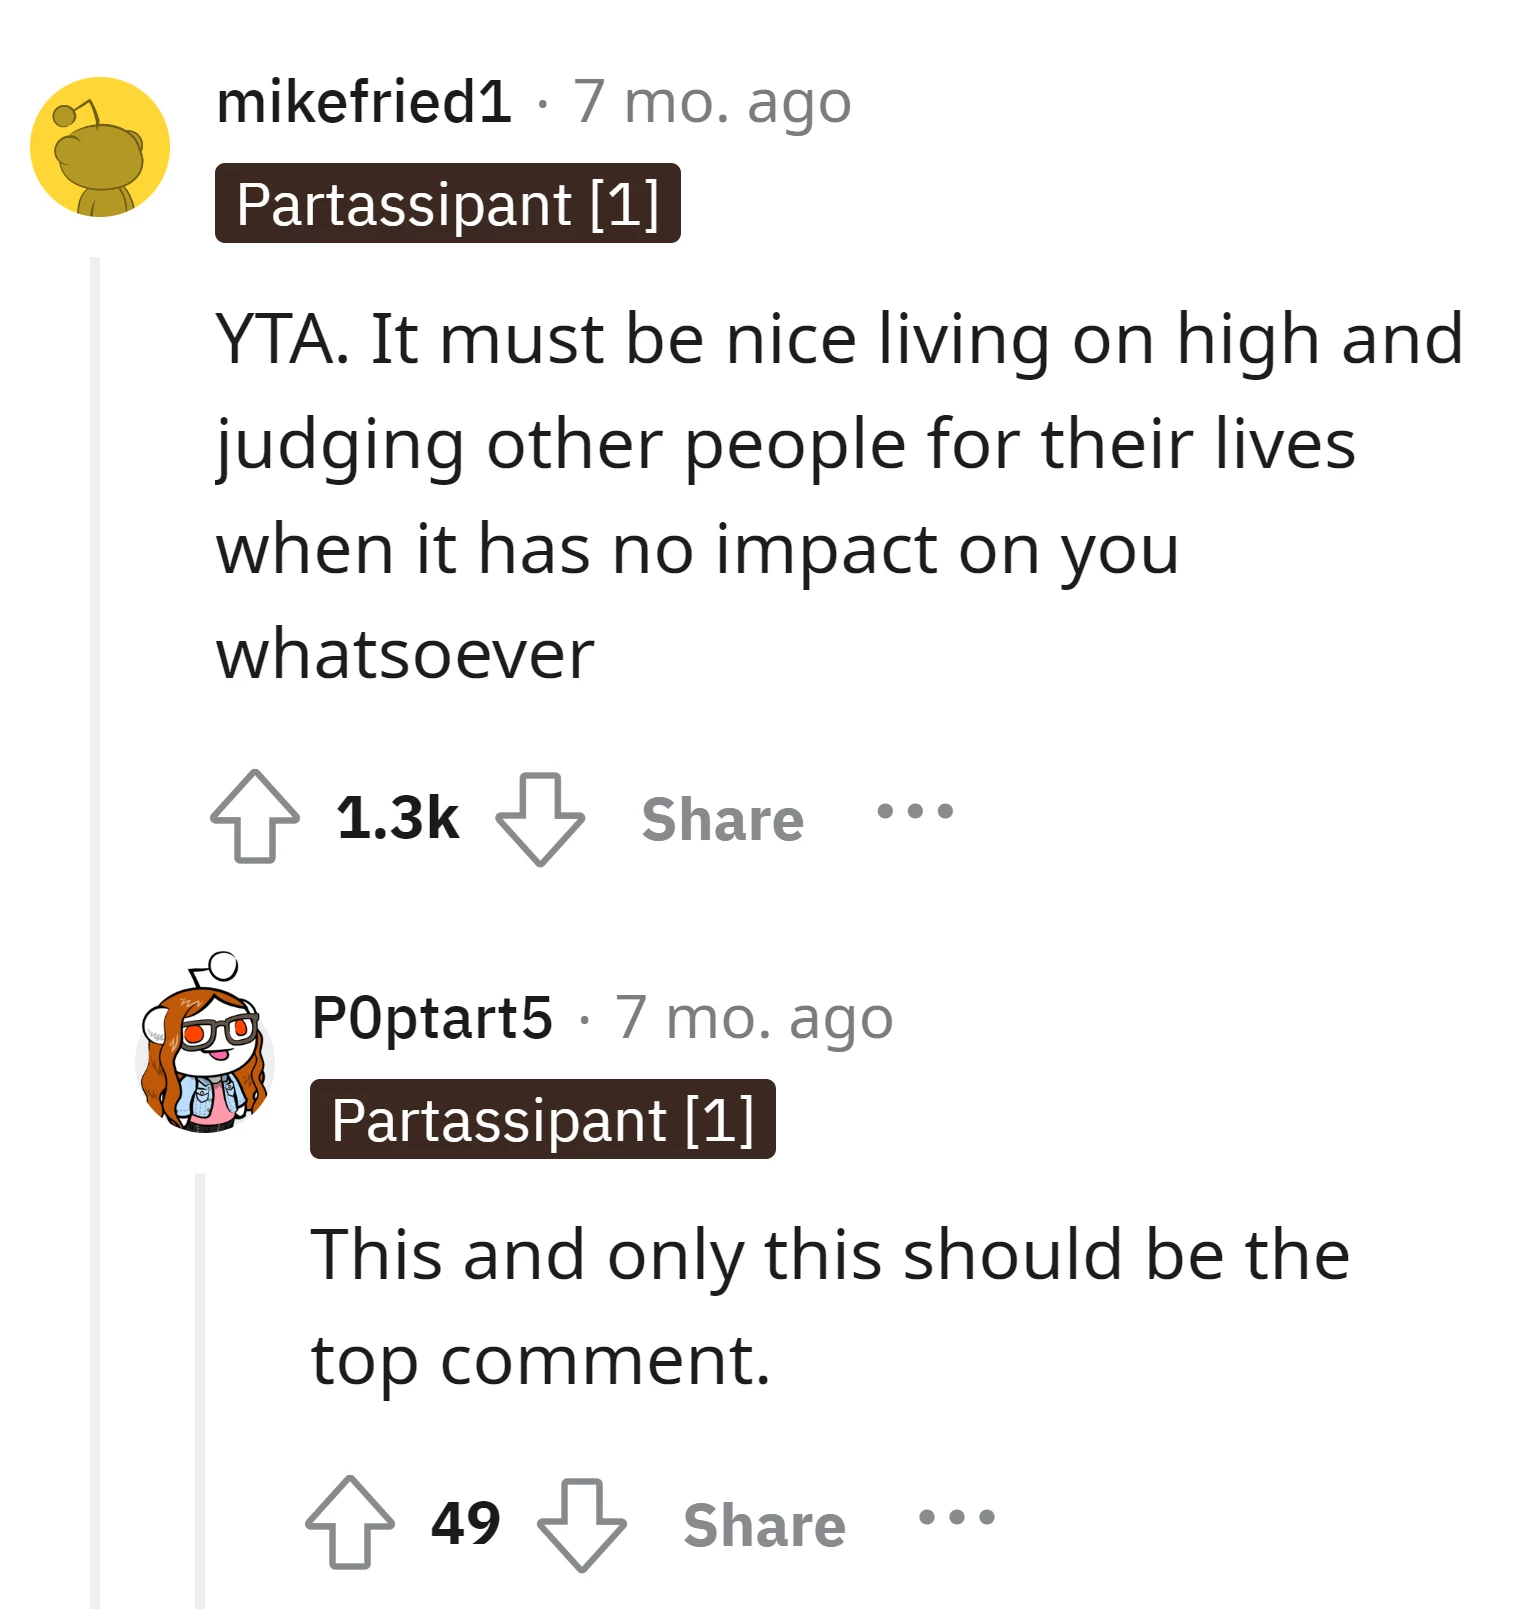 Commenter criticizes OP for passing judgment on others' lives without any personal impact